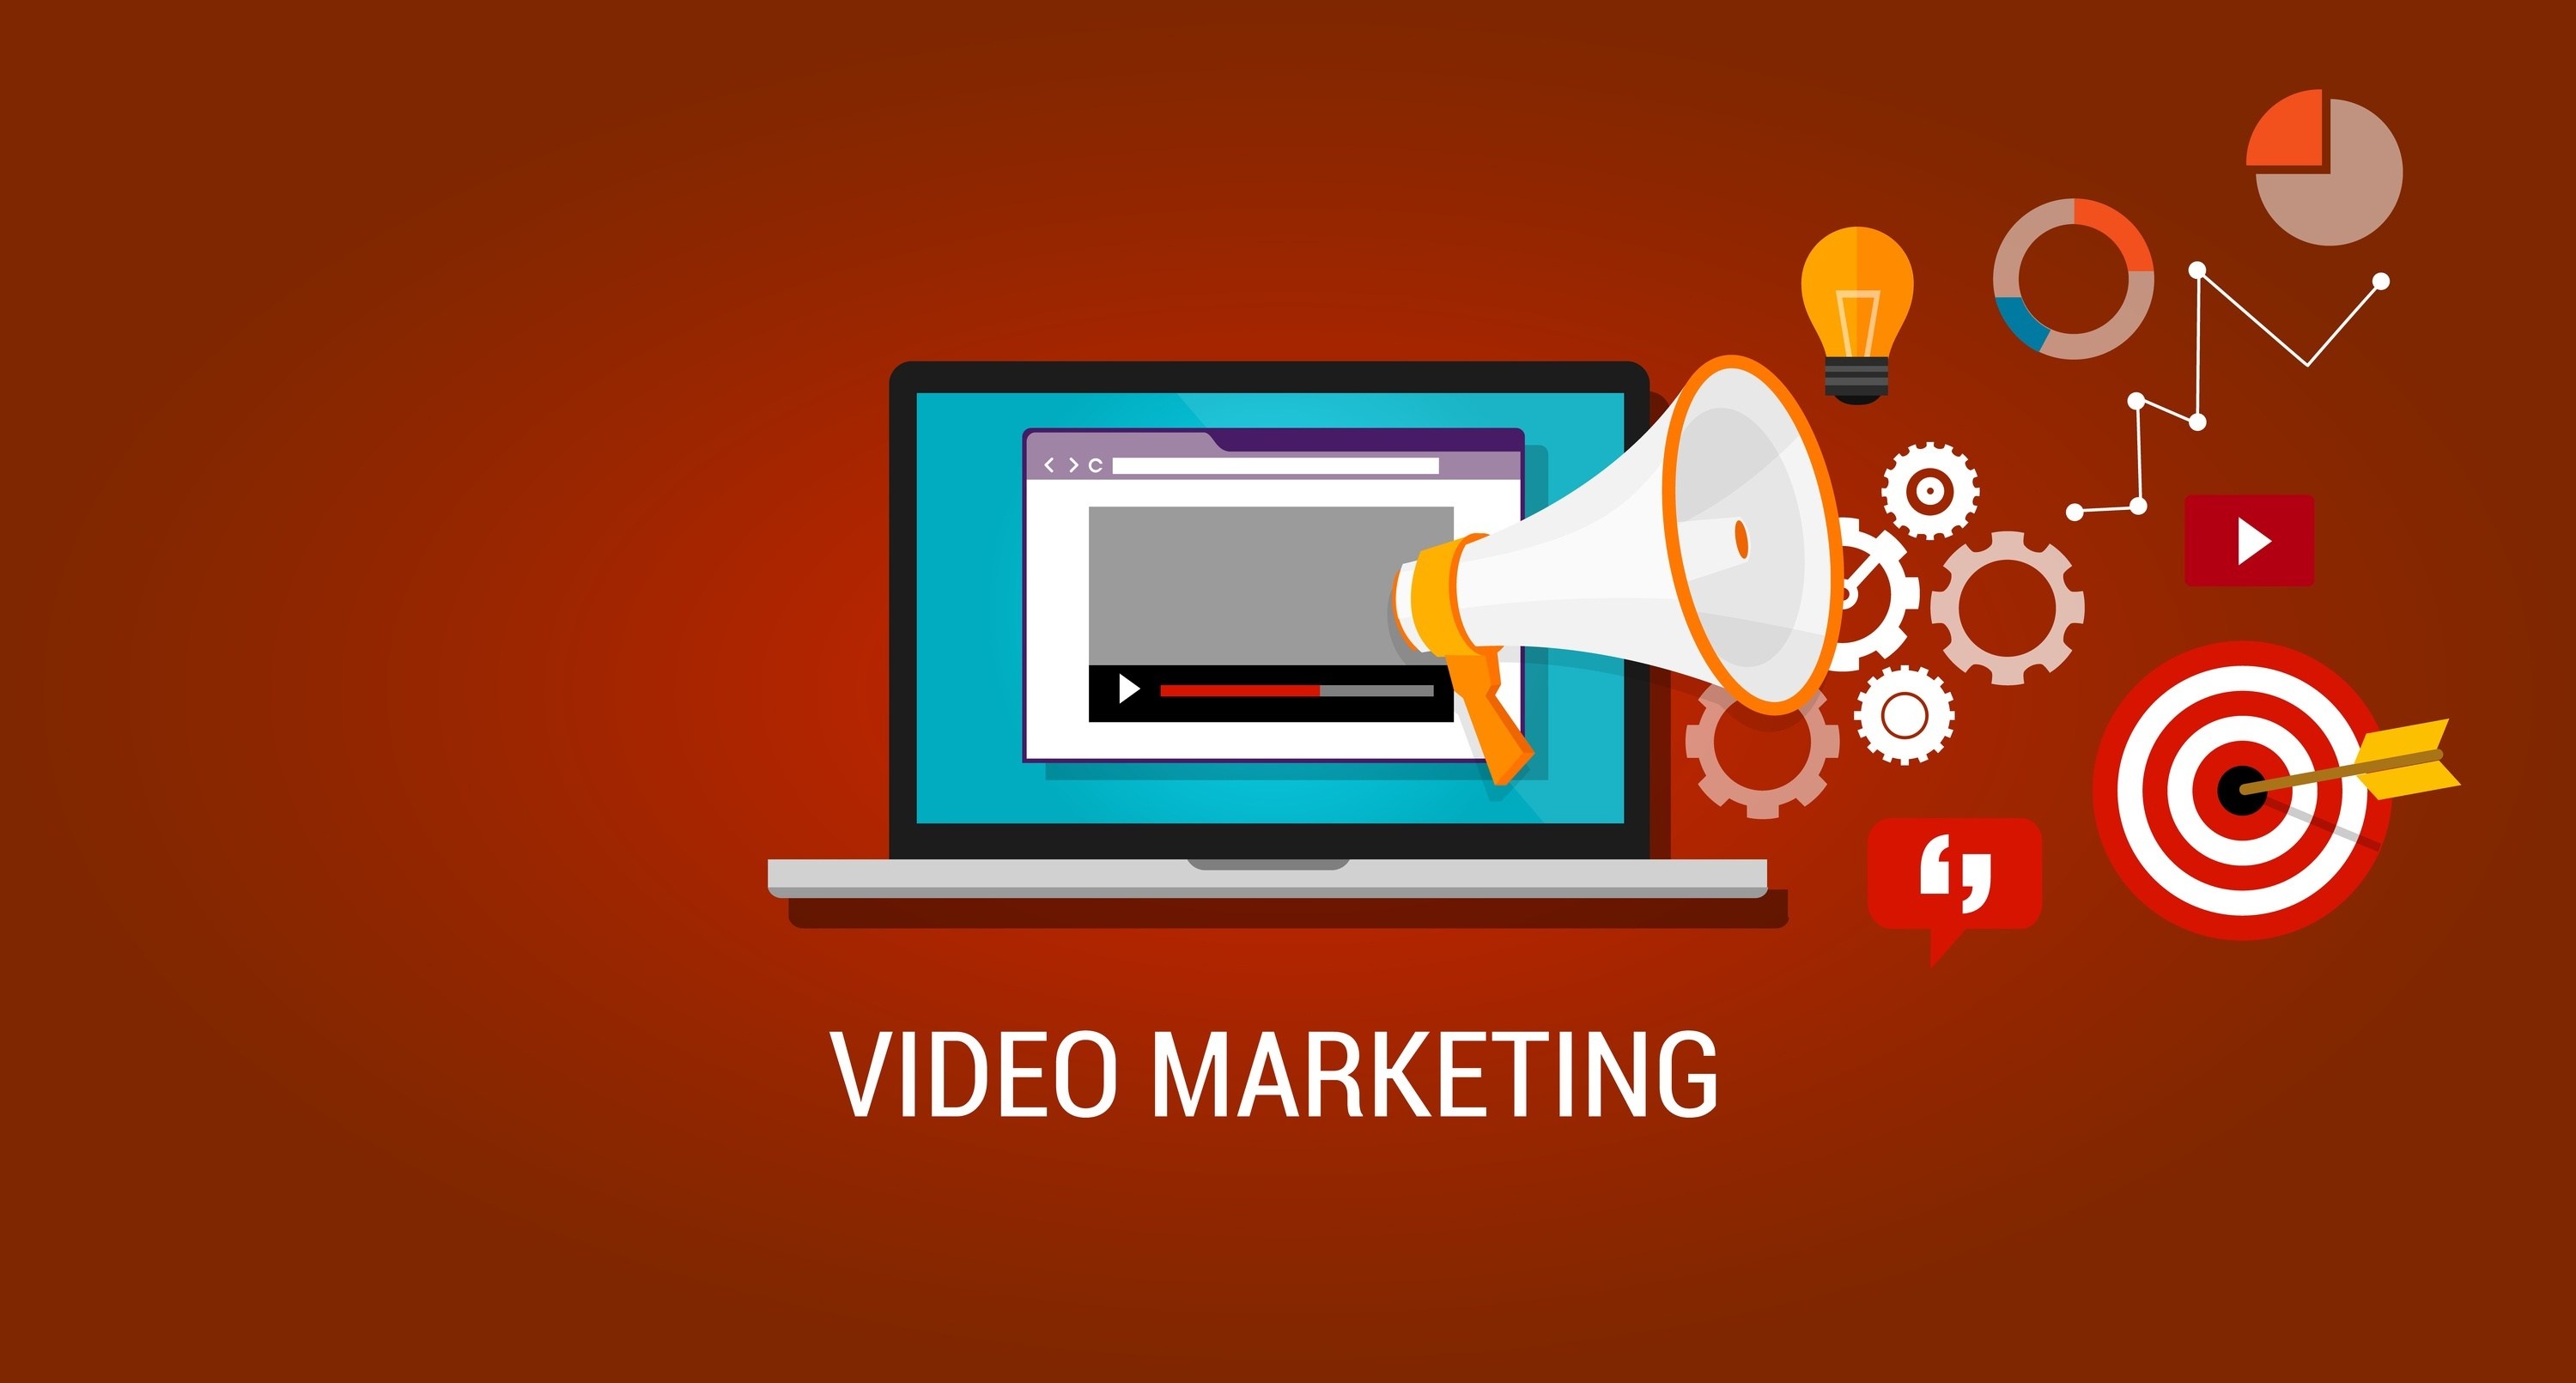 5 simple truths to define your video marketing strategy - Smart Insights